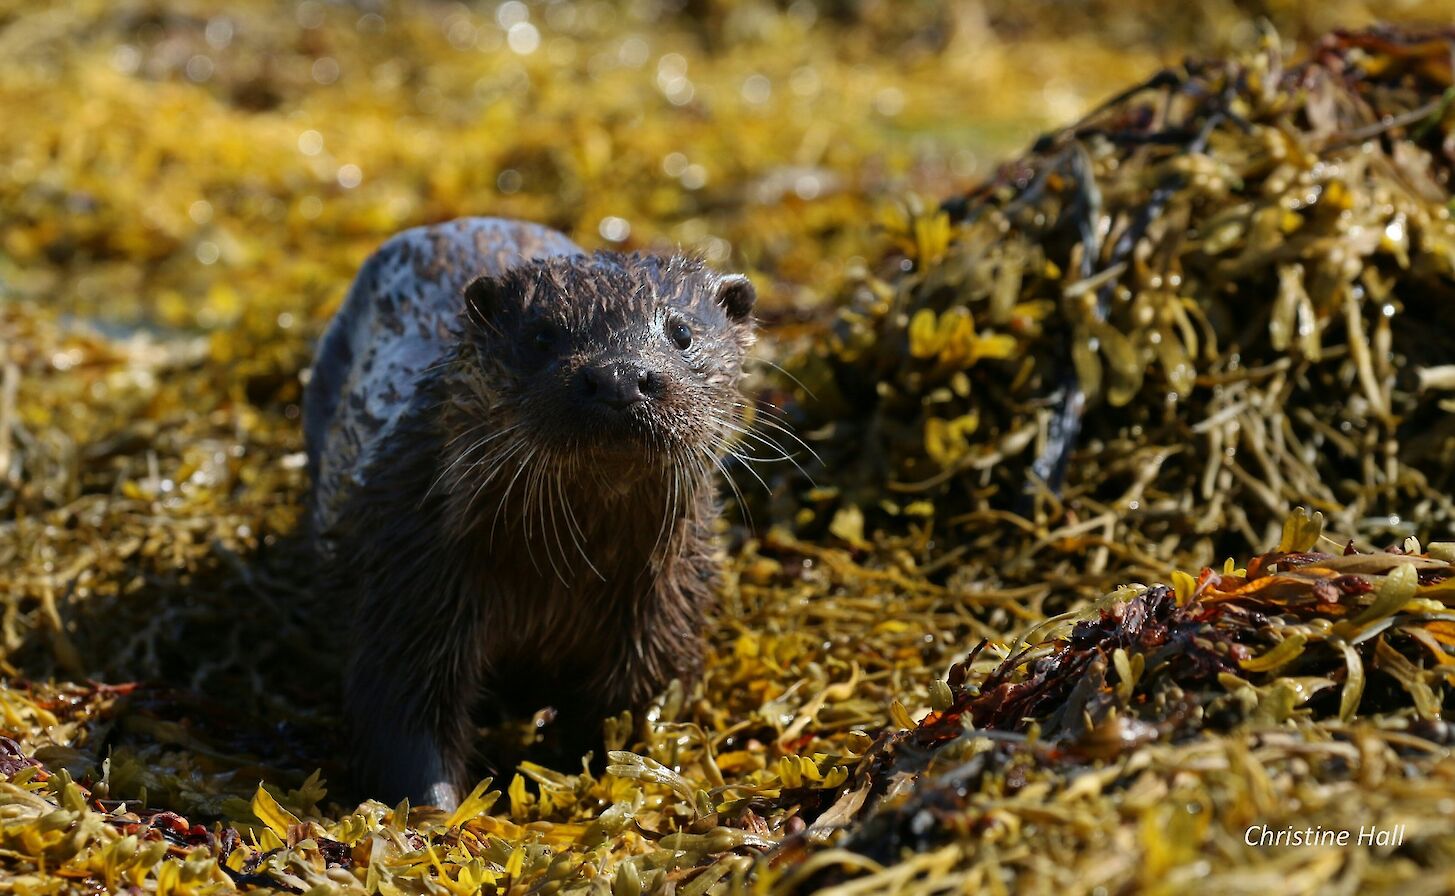 Close encounter with an otter in Westray - image by Christine Hall